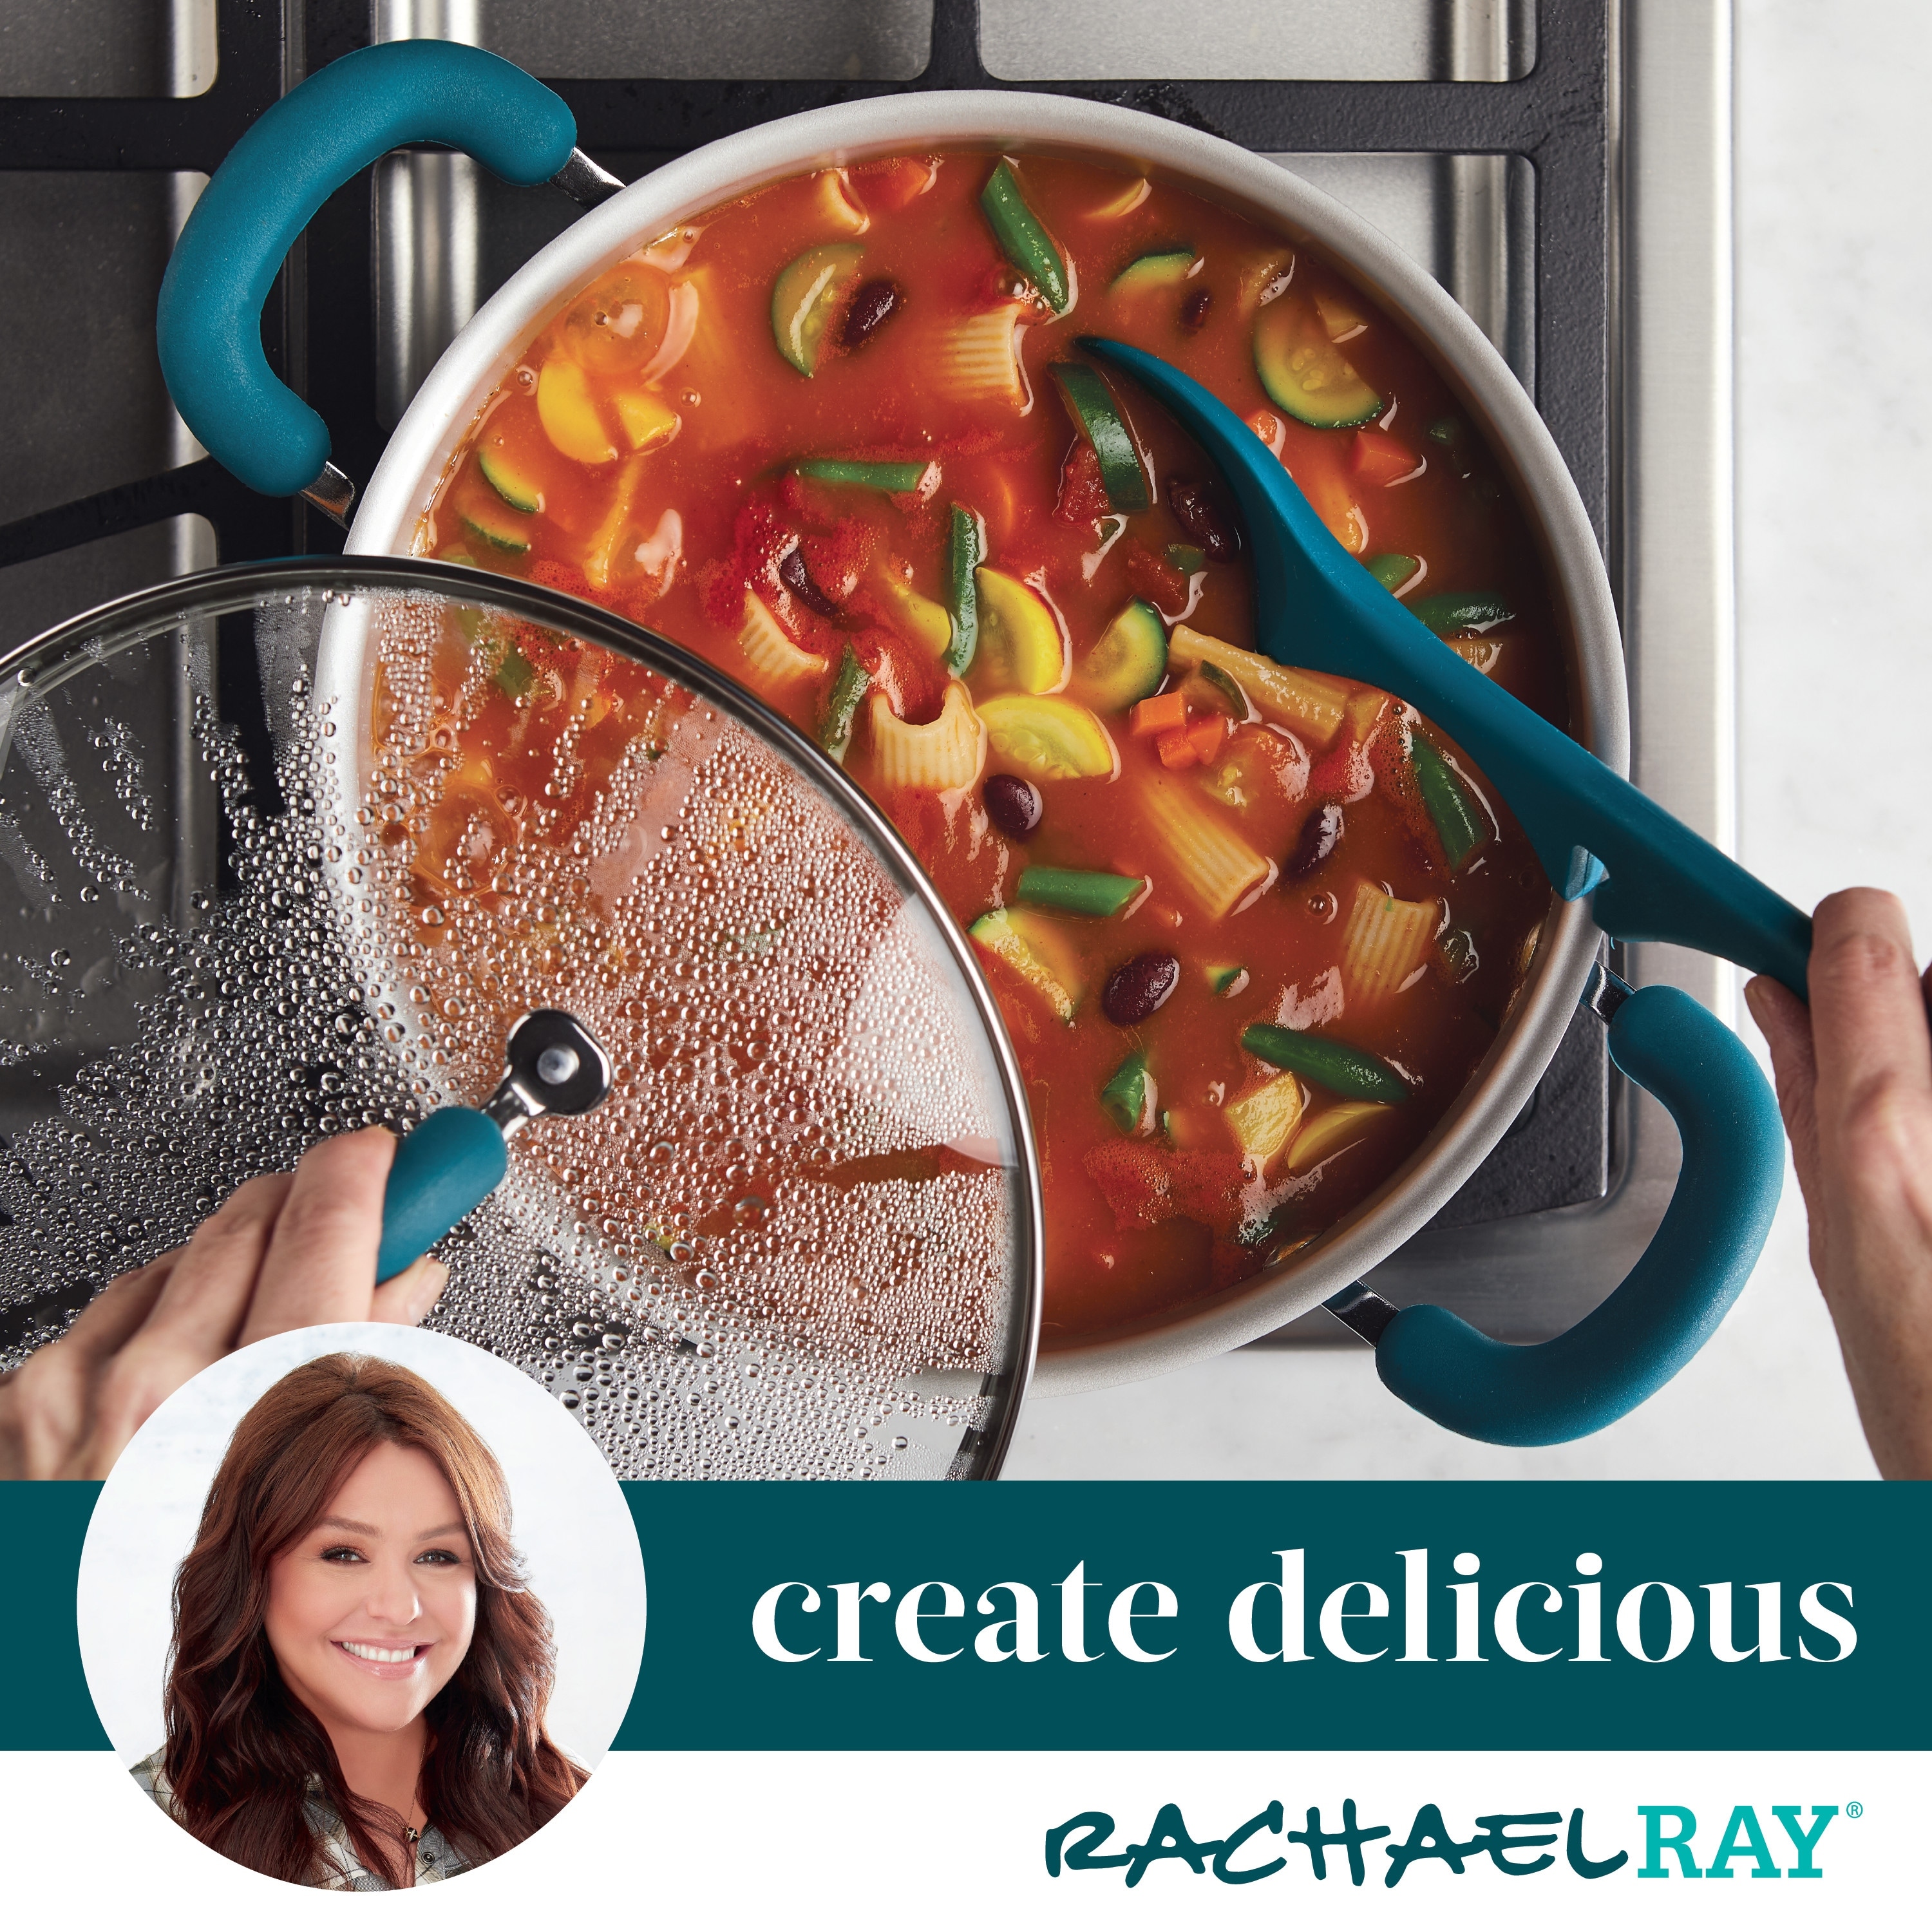 https://ak1.ostkcdn.com/images/products/is/images/direct/5dc6ac4109543656d7e5d6f284942d20f97aa045/Rachael-Ray-Create-Delicious-Aluminum-Nonstick-Induction-Dutch-Oven-with-Lid%2C-5-Quart%2C-Teal-Shimmer.jpg